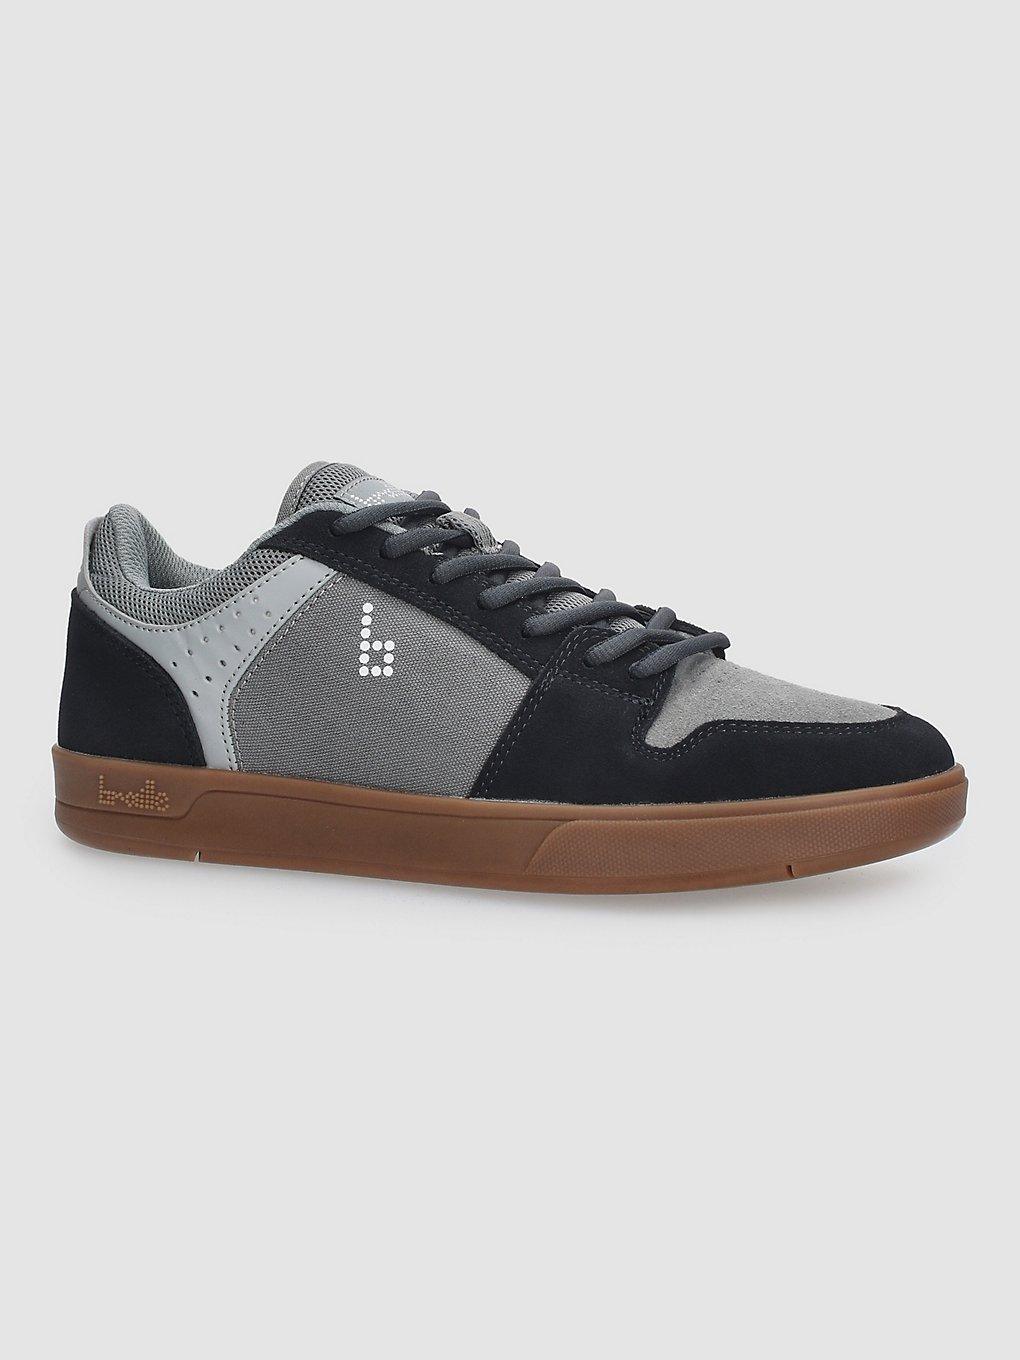 Braille Skateboarding Red Lodge Skate Shoes grey with gum kaufen